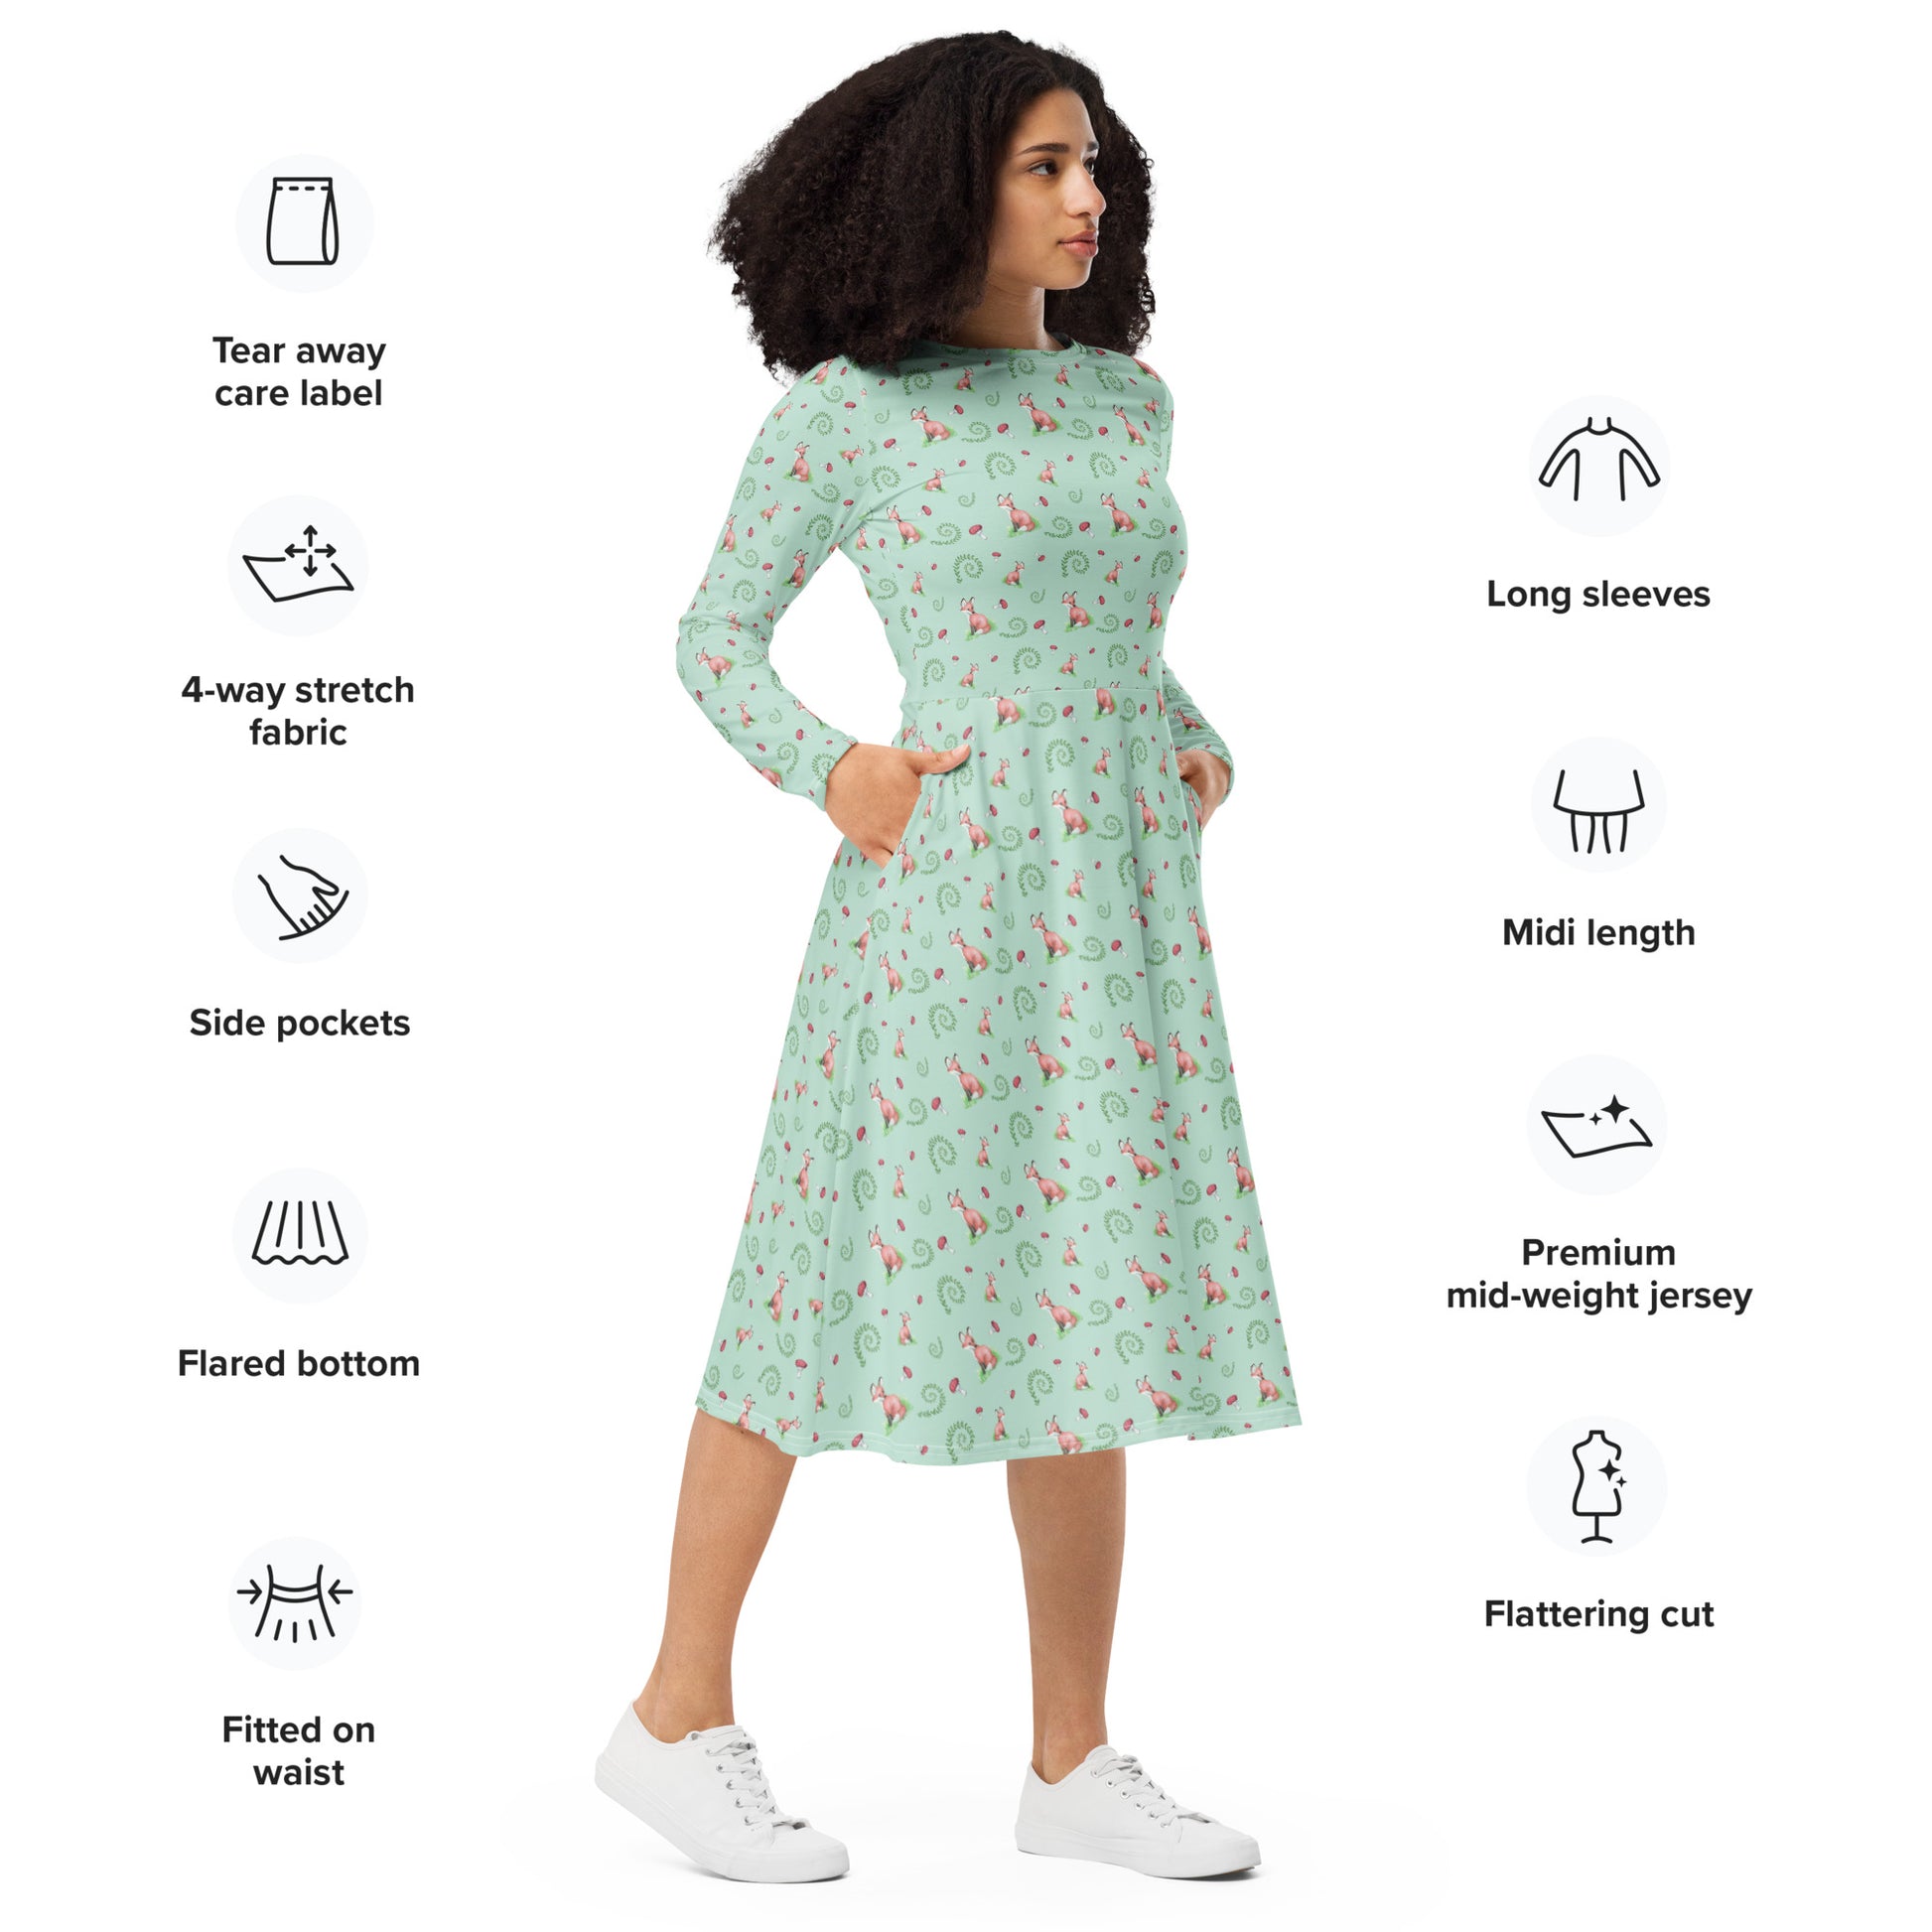 Forest fox patterned long sleeve midi dress with side pockets. Has watercolor foxes, mushrooms, and ferns on a light green fabric. Features boat neckline and fitted elastic waist. Shown on female model.